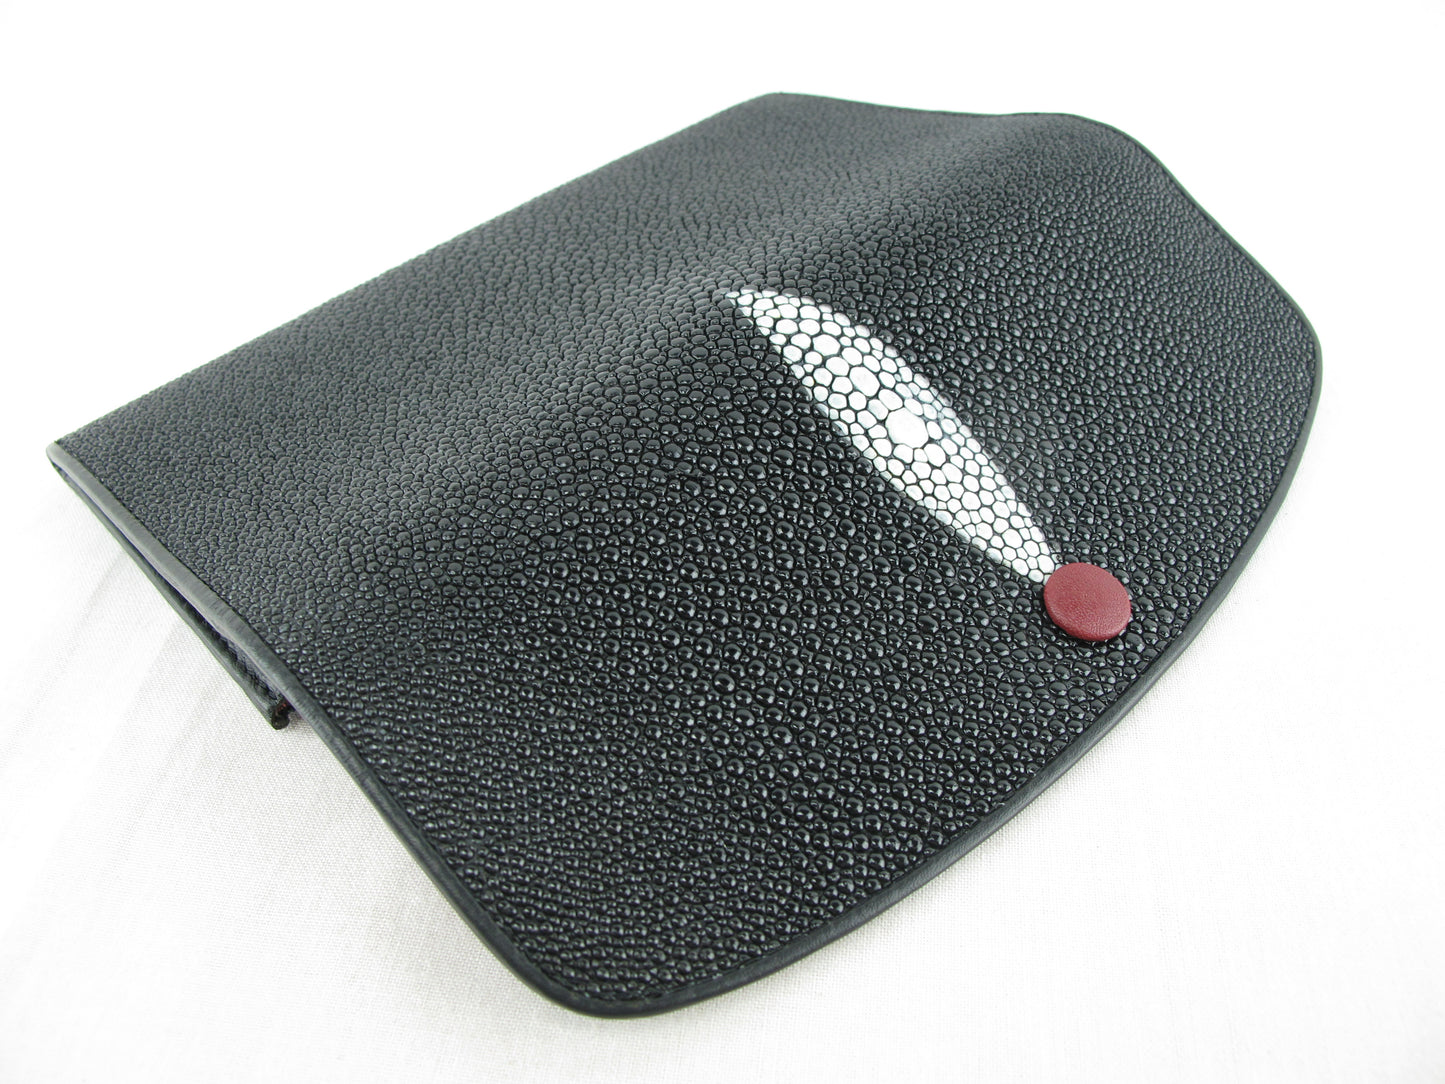 Genuine Stingray Skin Leather Women's Clutch Wallet Purse Black with Red Inside